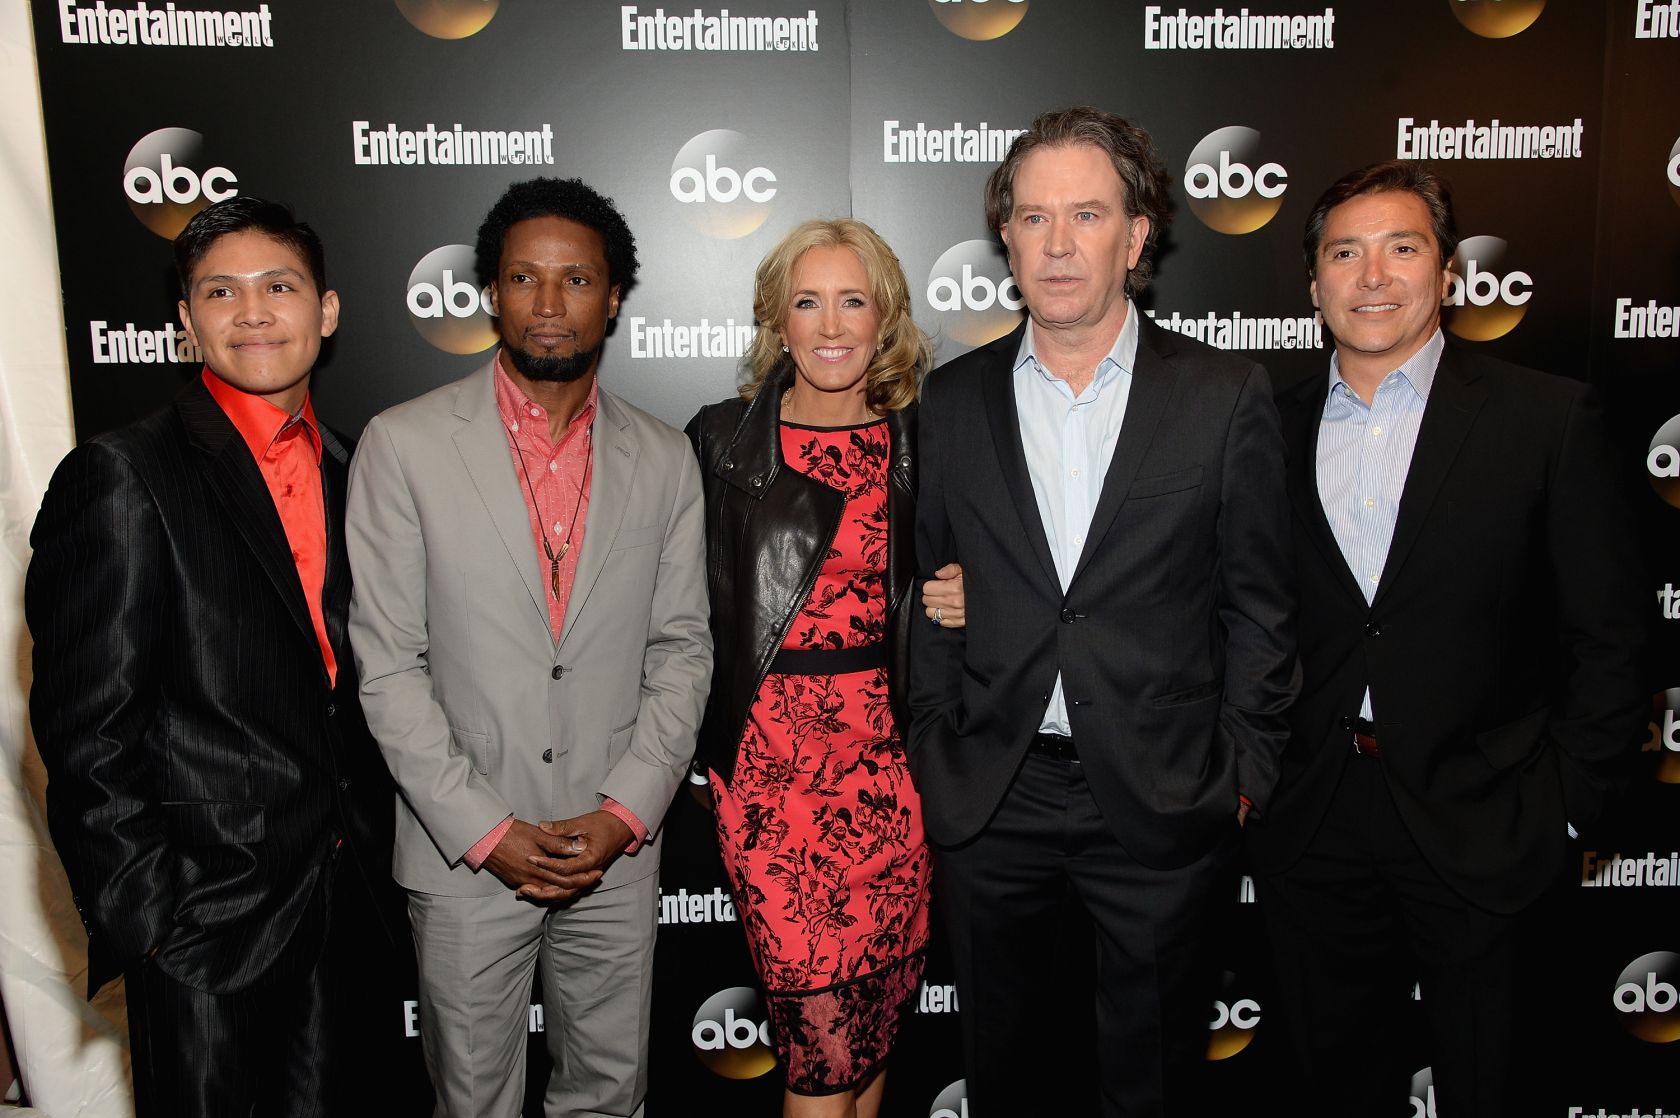 Entertainment Weekly And ABC Celebrate The New York Upfronts - Arrivals